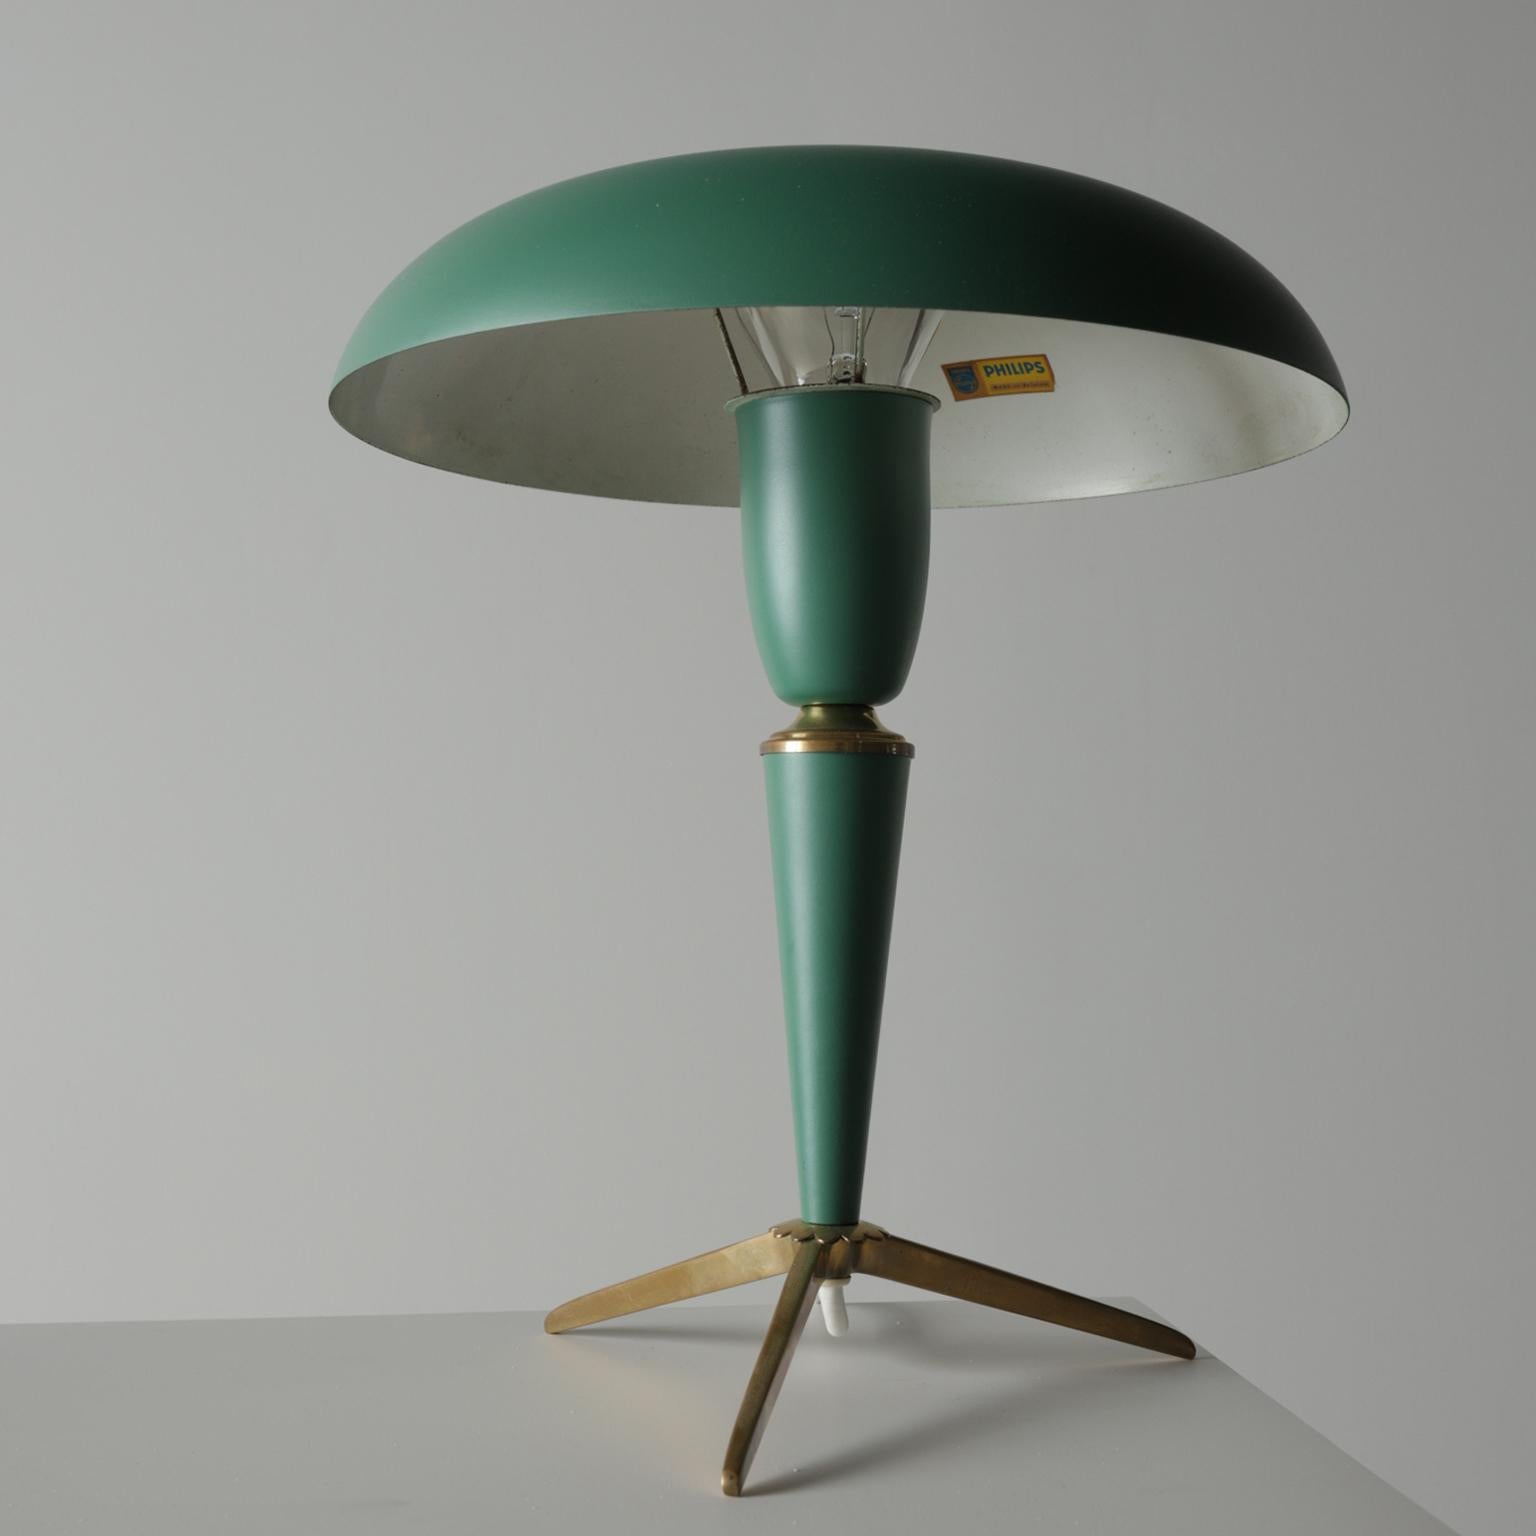 Materials: Gold painted tripod base made of brass. Some brass parts. Dark green painted conical plastic stem and socket holder. Dark green metallic painted aluminium mushroom lampshade with a centre hole. Painted white on the inside.

Period: